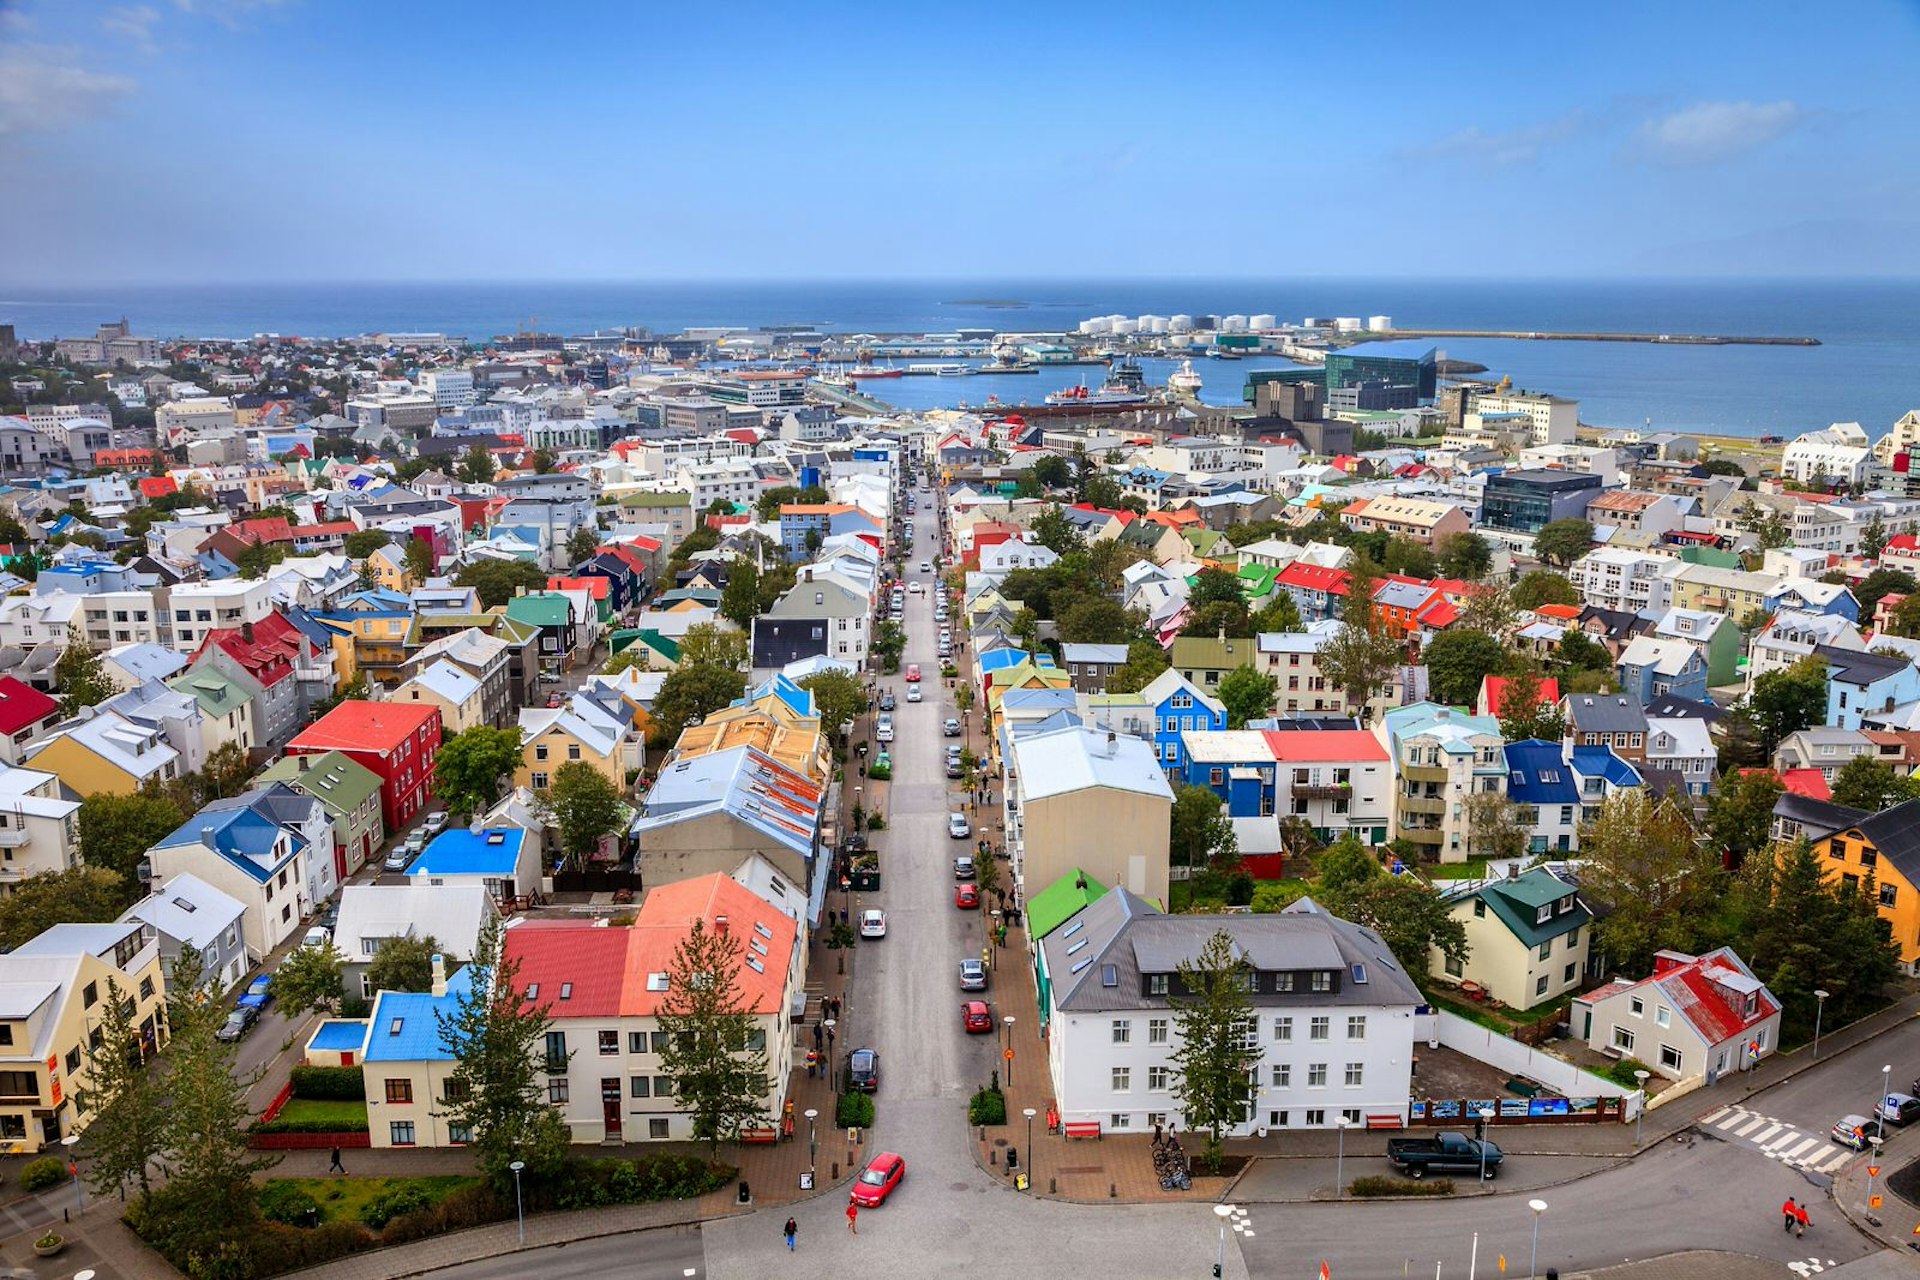 Looking across downtown Reykjavík and the Old Harbour © Alexey Stiop / Shutterstock